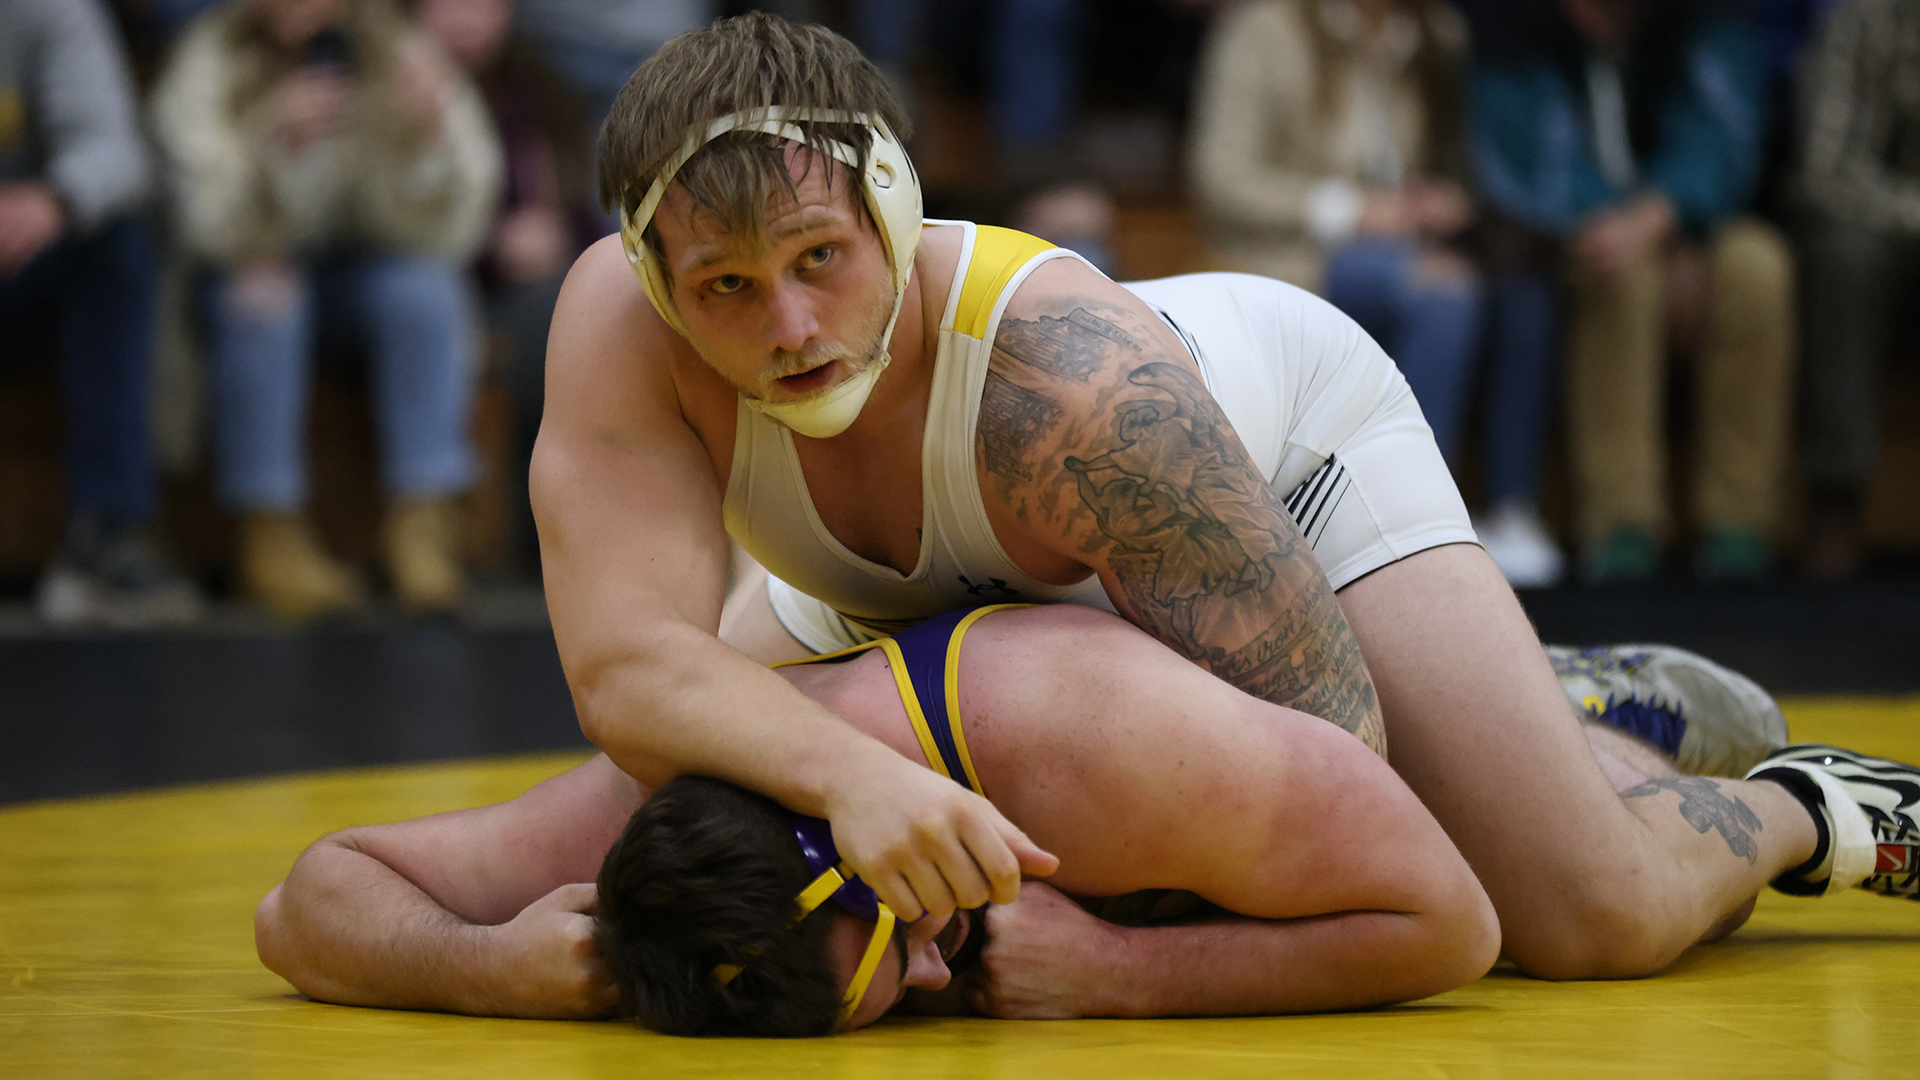 Jordan Lemcke went unbeaten in four matches to win the 285-pound title at the Milwaukee School of Engineering Invitational.